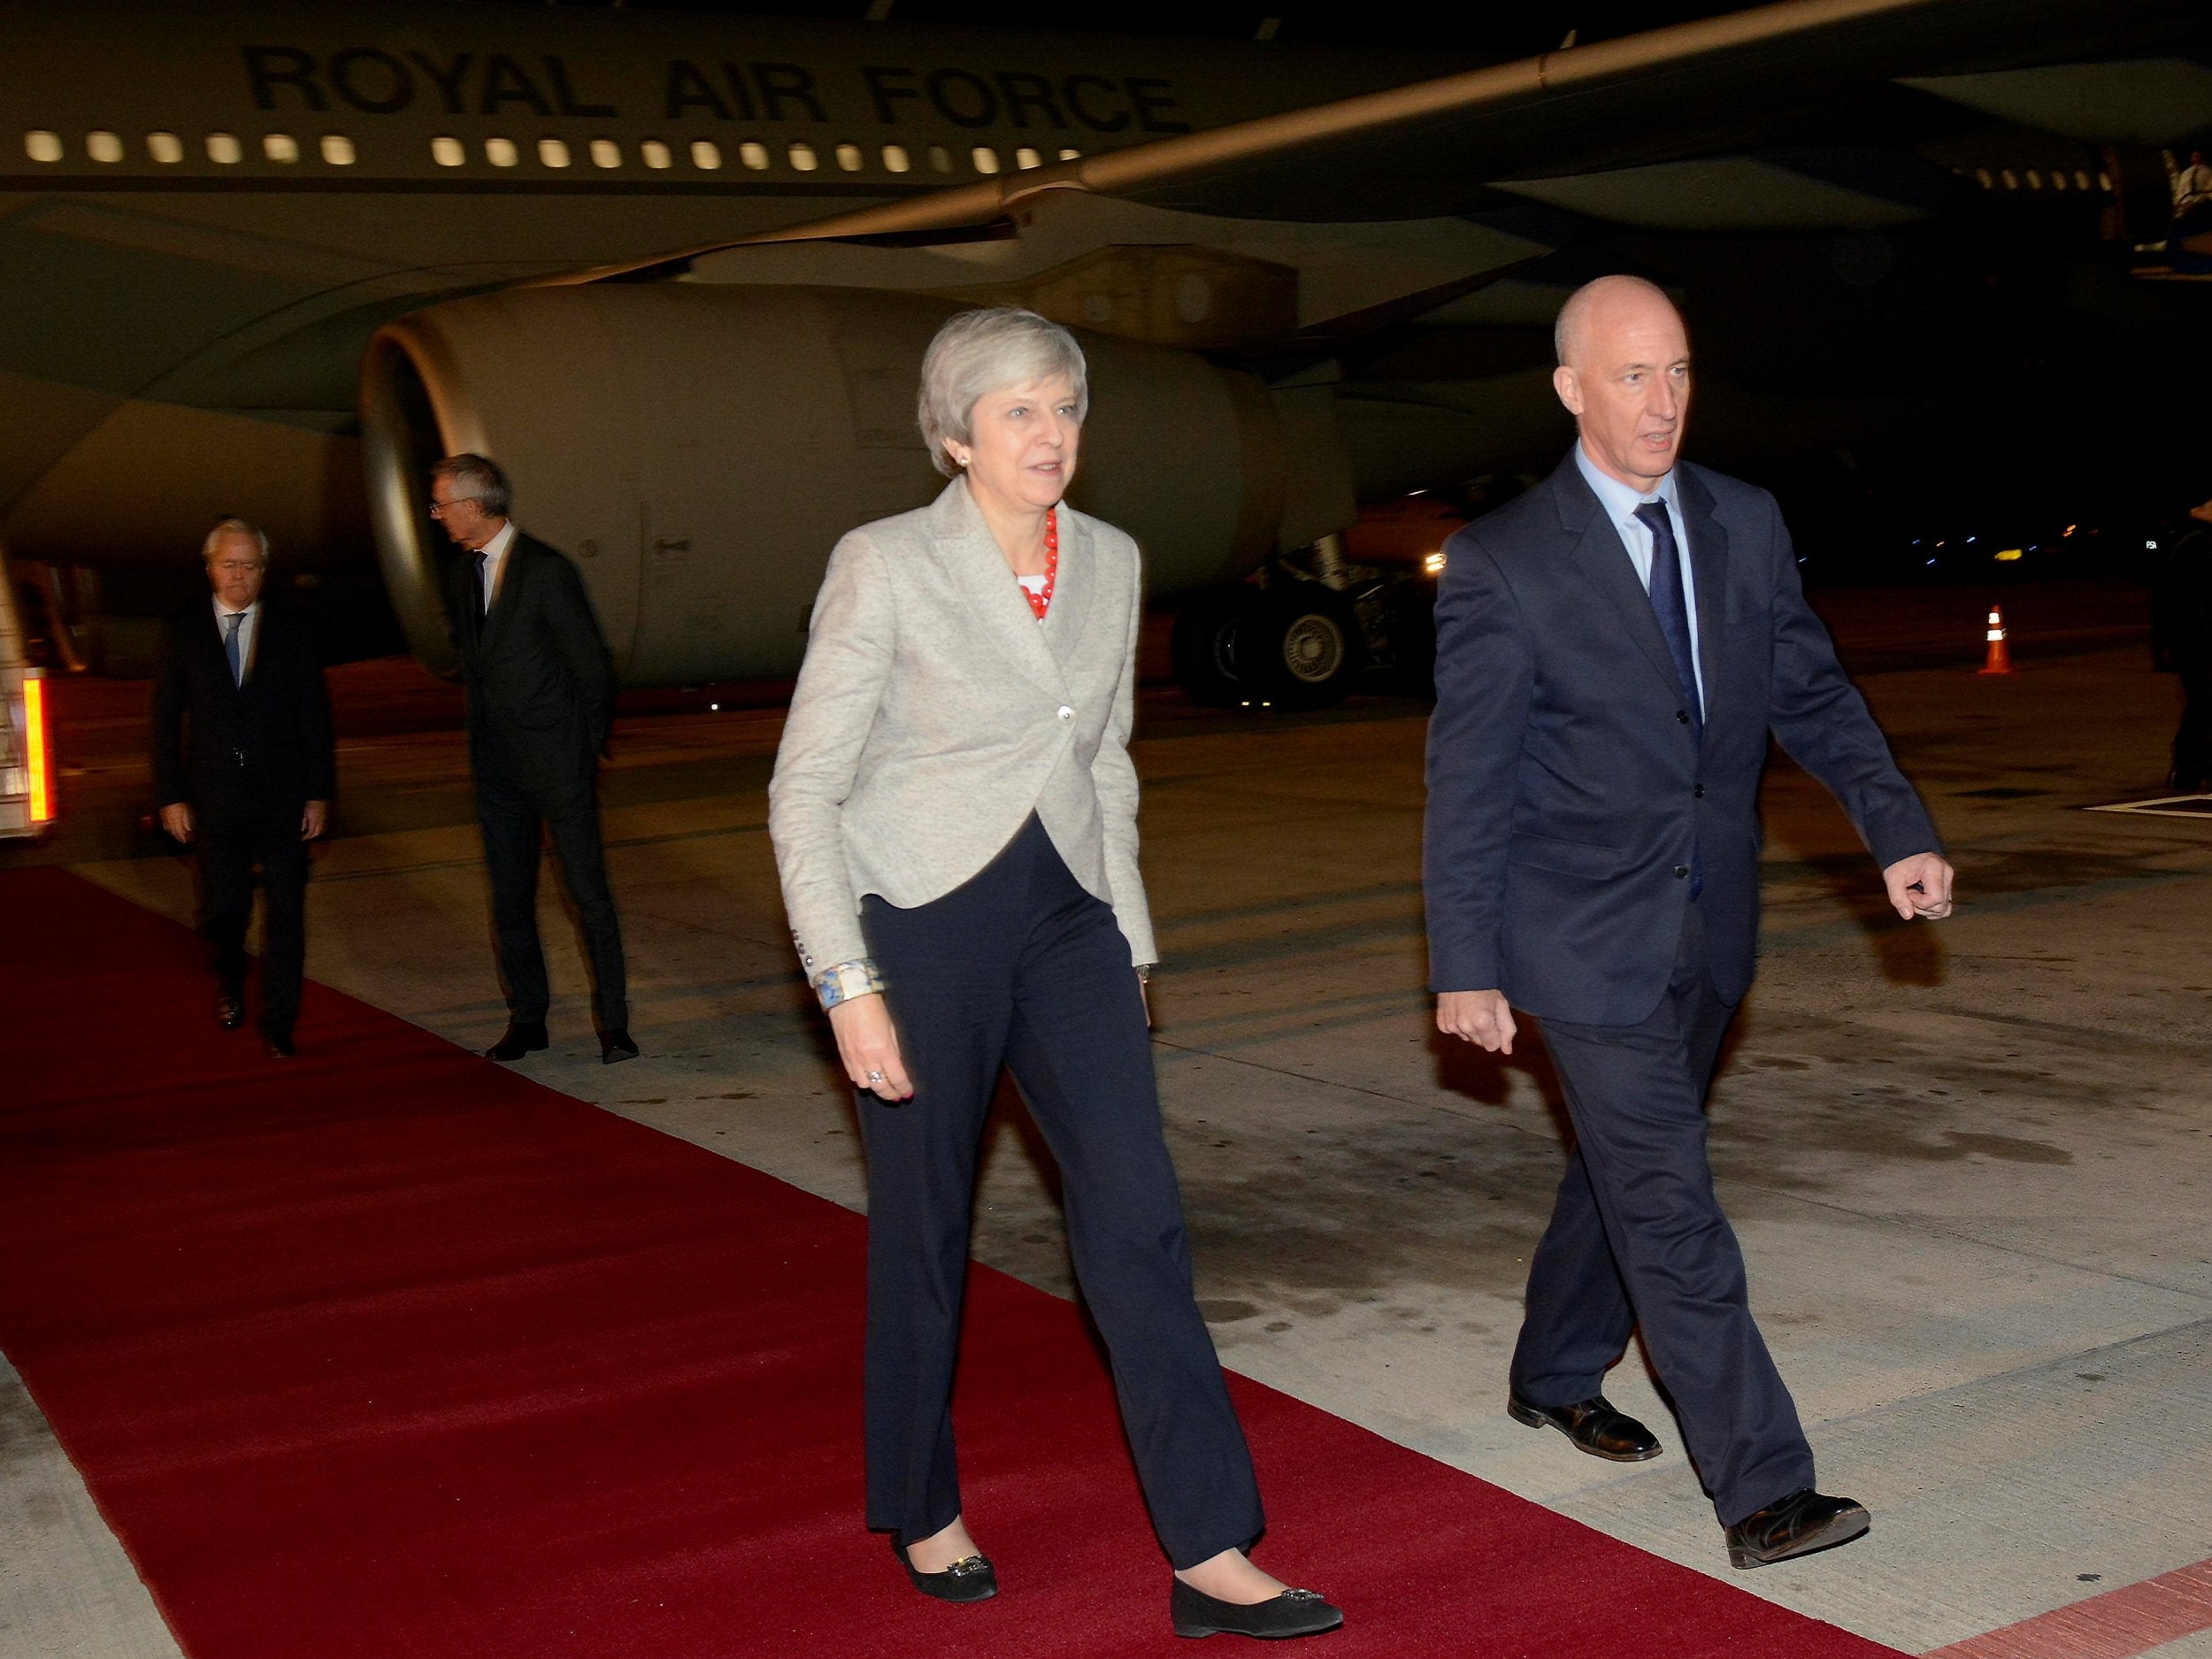 Theresa May arrives ahead of the G20 leaders' summit in Buenos Aires, Argentina